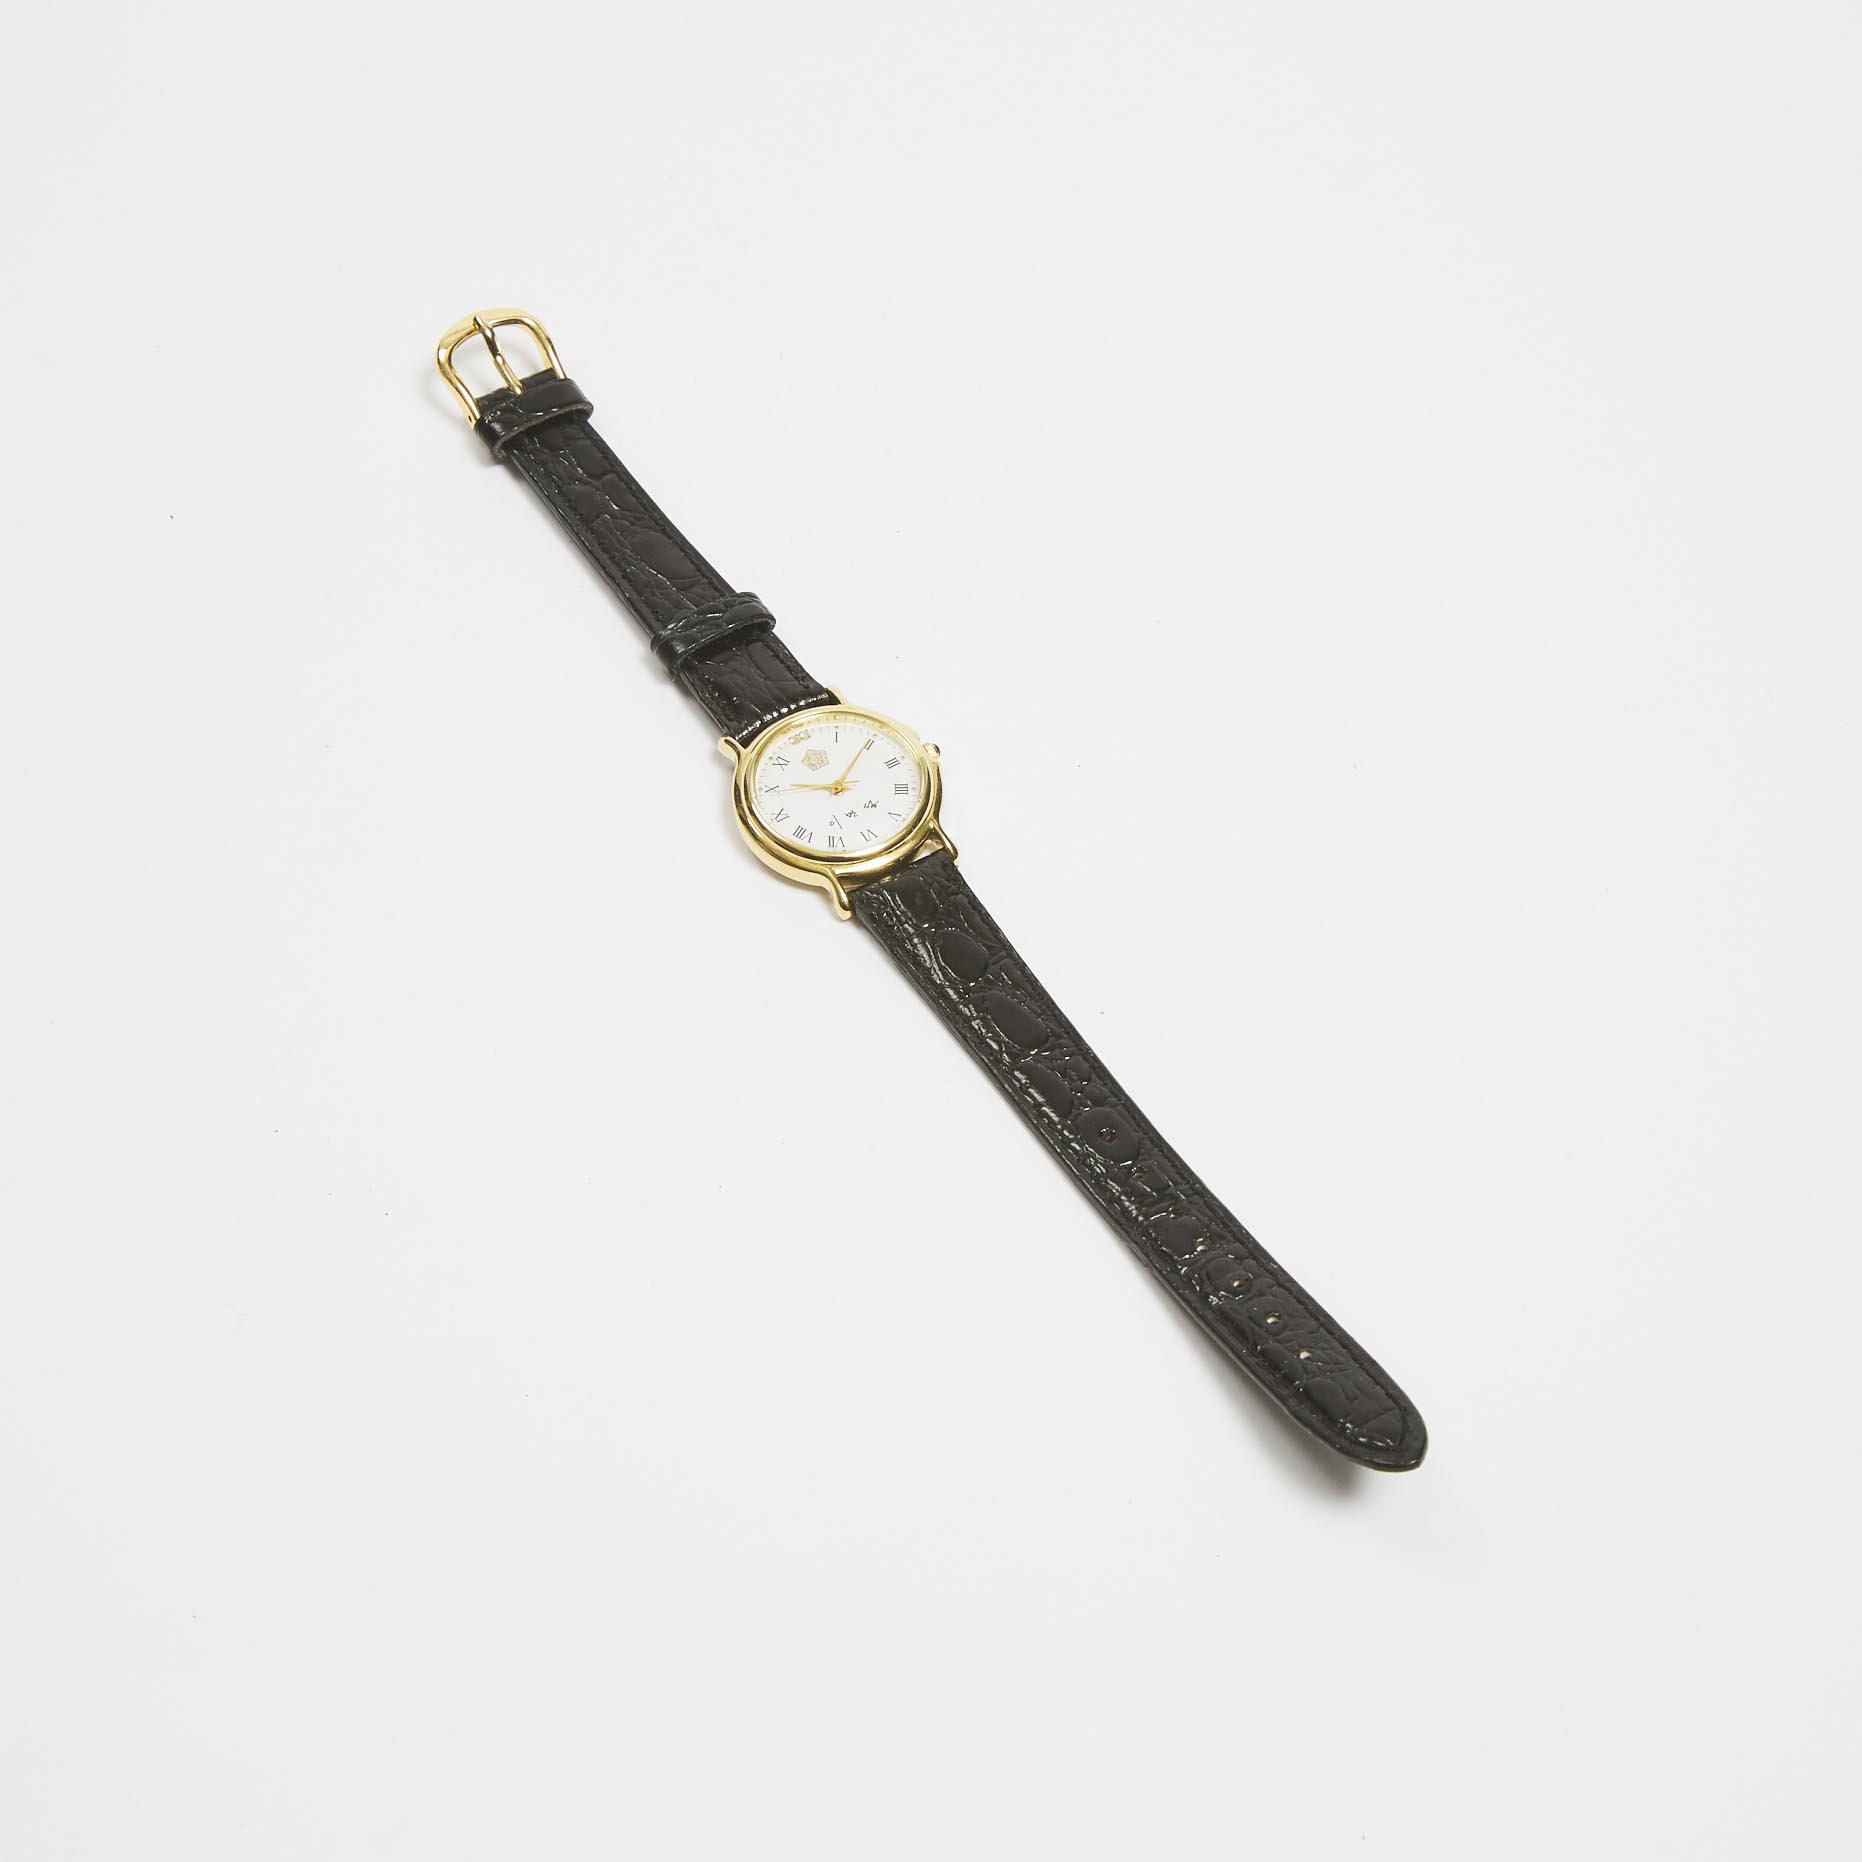 A Korean Wristwatch, With the Former National Assembly Speaker Lee Man Sop's (이만섭) Signature, Circa 1995